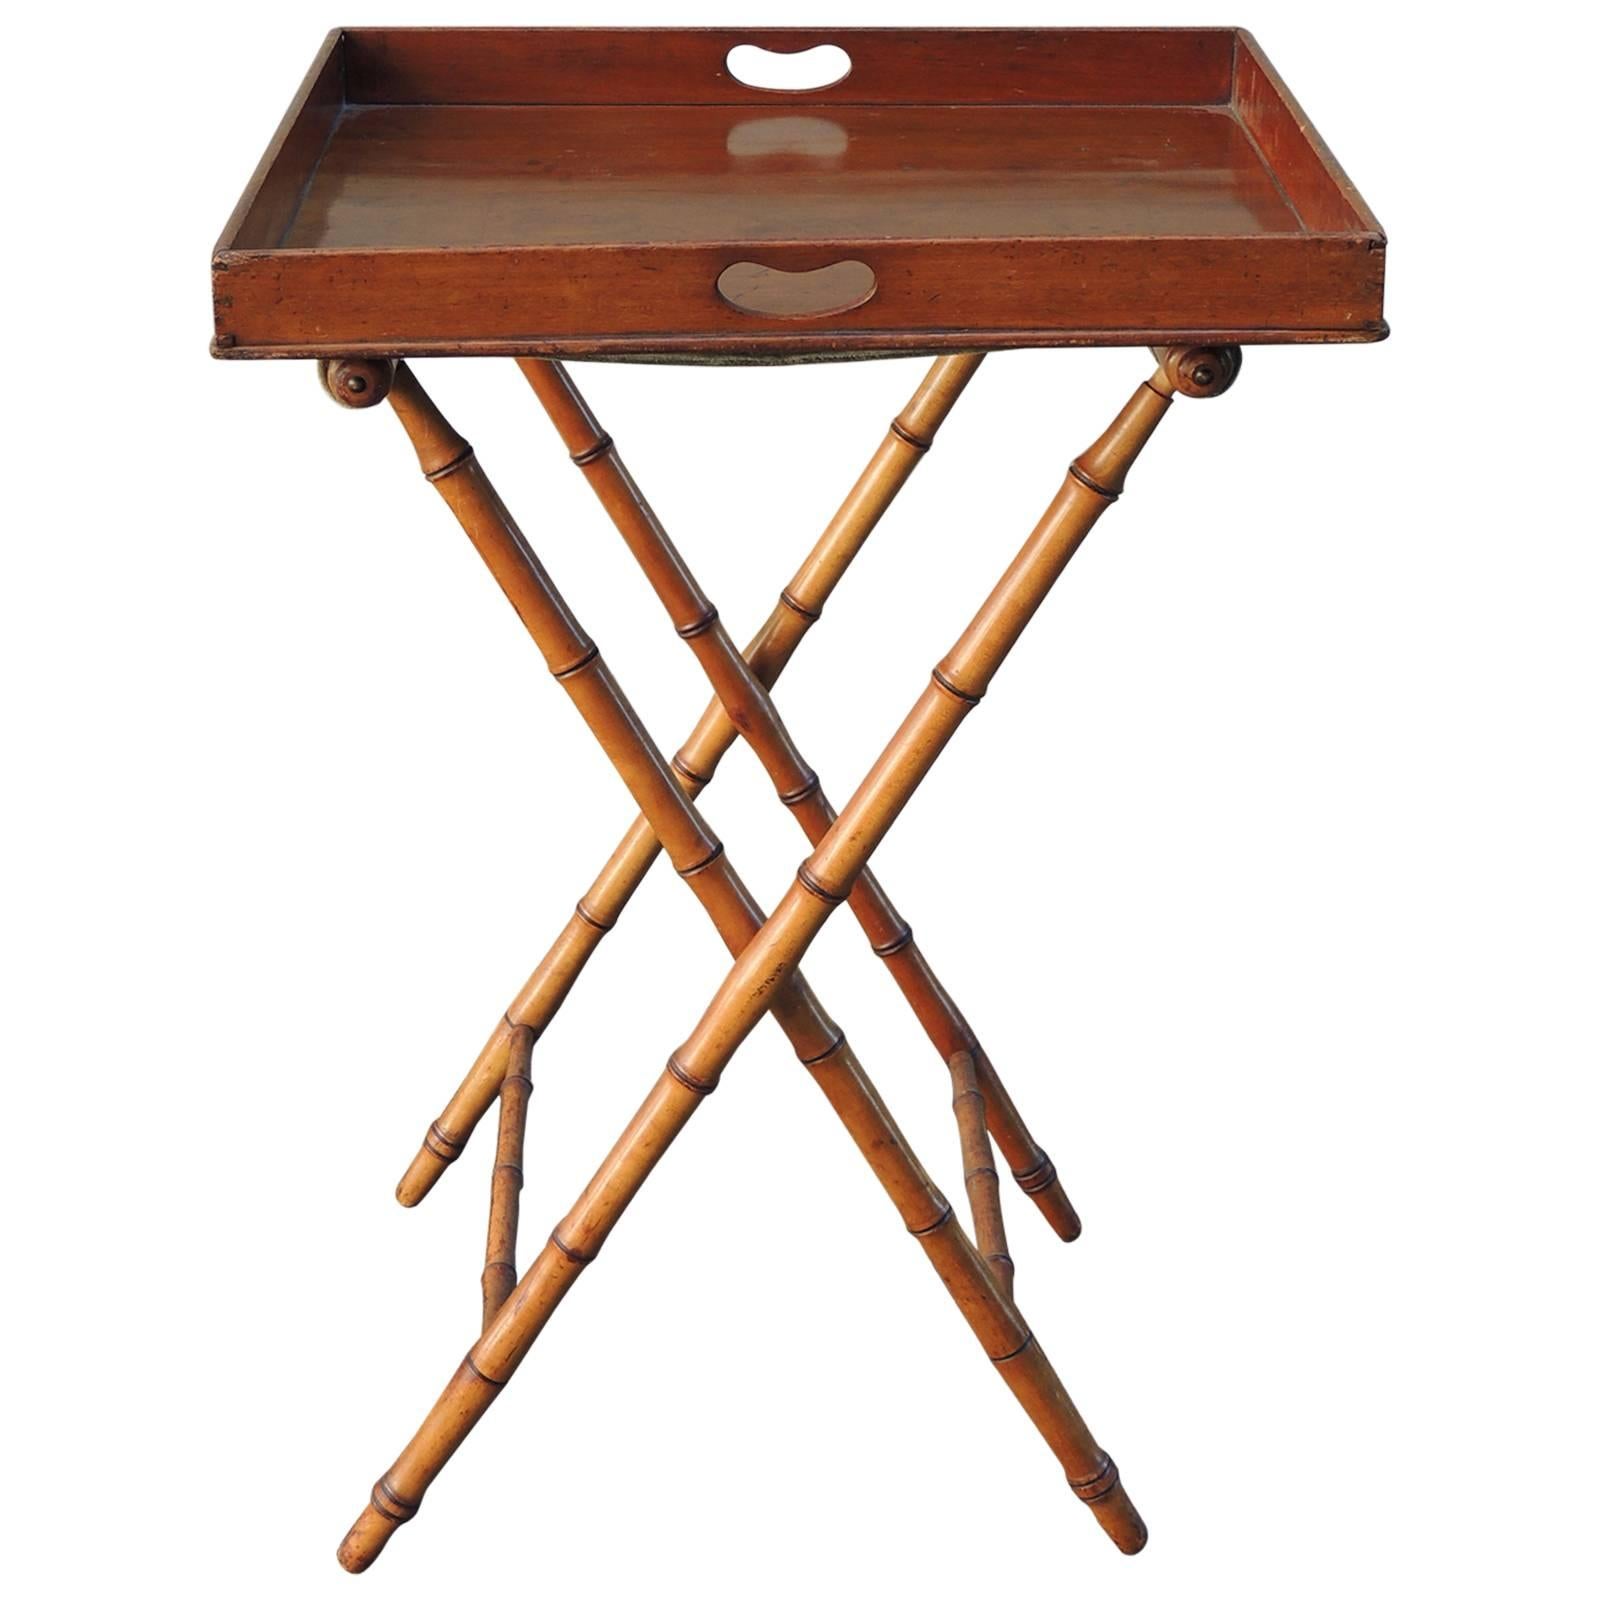 19th C English Regency Butlers Tray Table with Faux Bamboo Legs